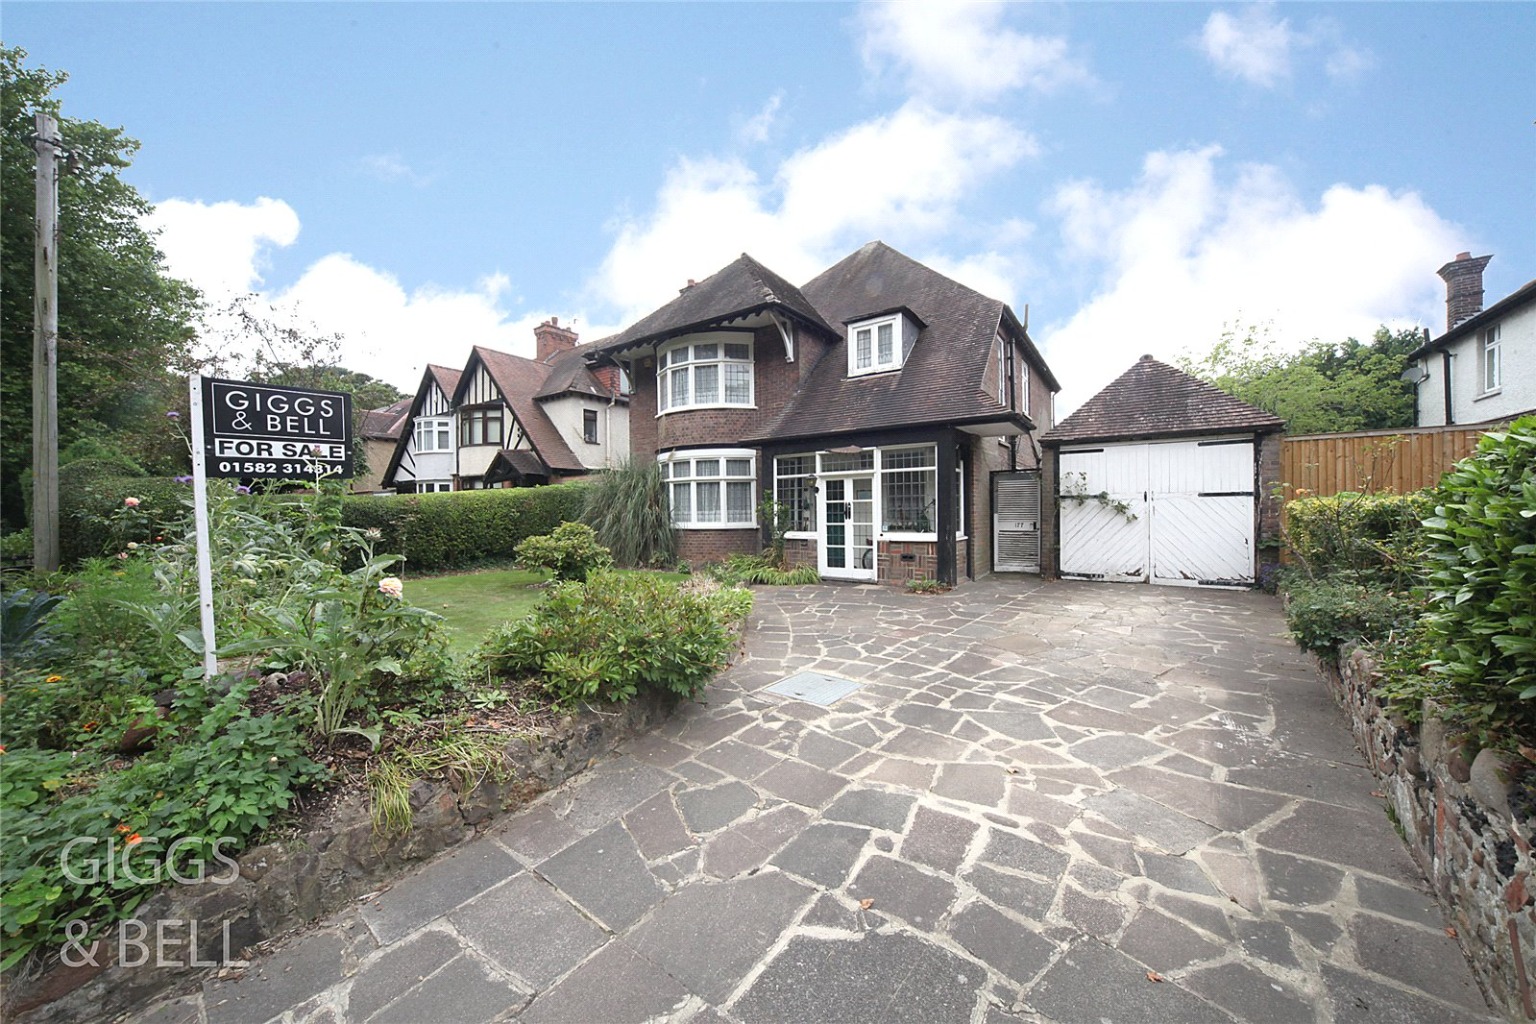 5 bed detached house for sale in New Bedford Road, Luton, LU3 